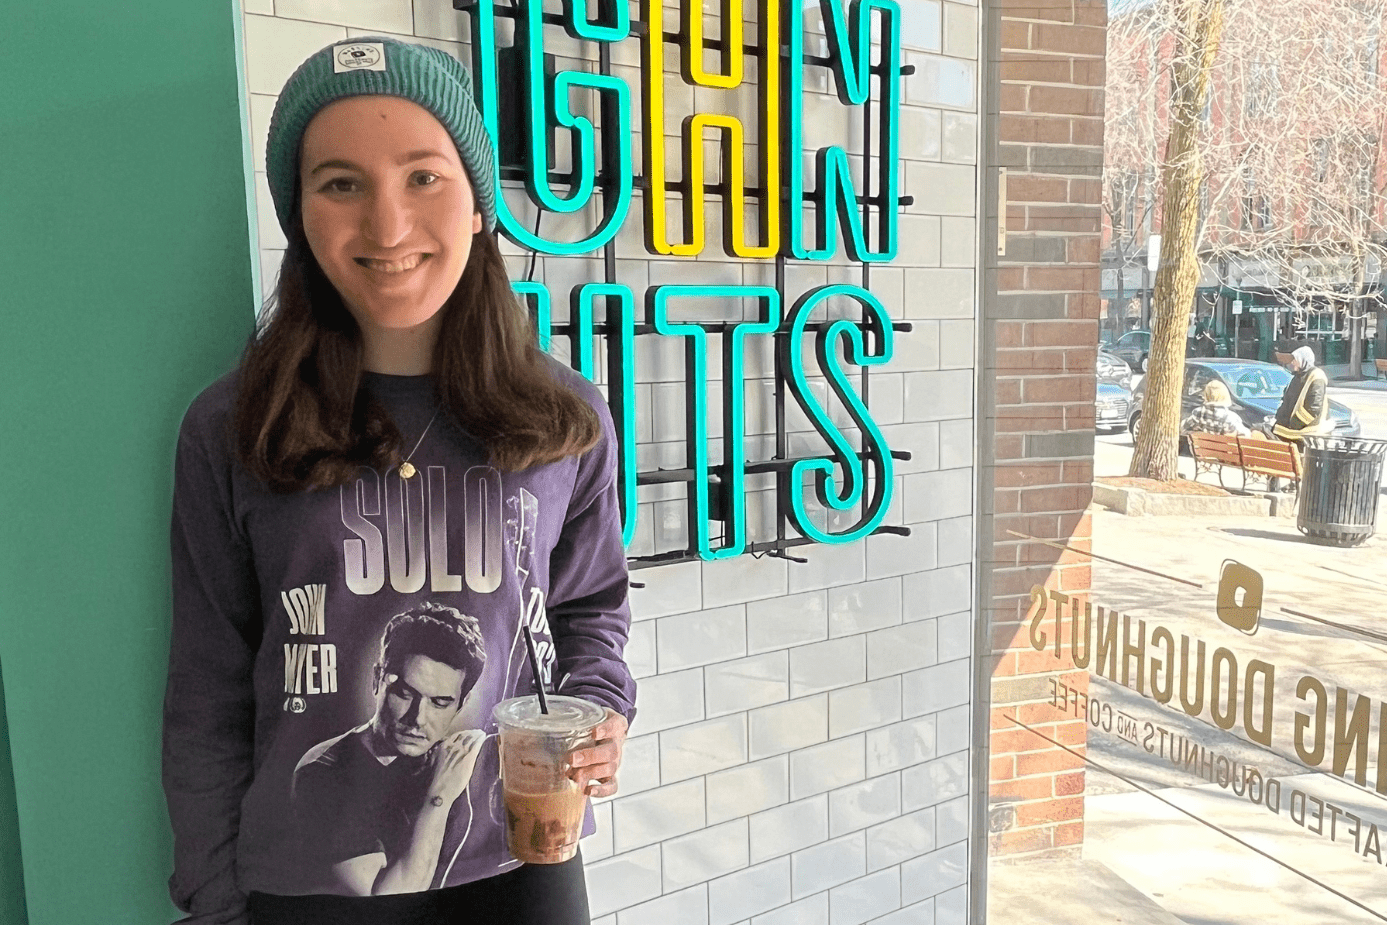 Local foodie and Skidmore student Sarah Libov 鈥�24 sheds some light on what your favorite Saratoga coffee shop might say about you.